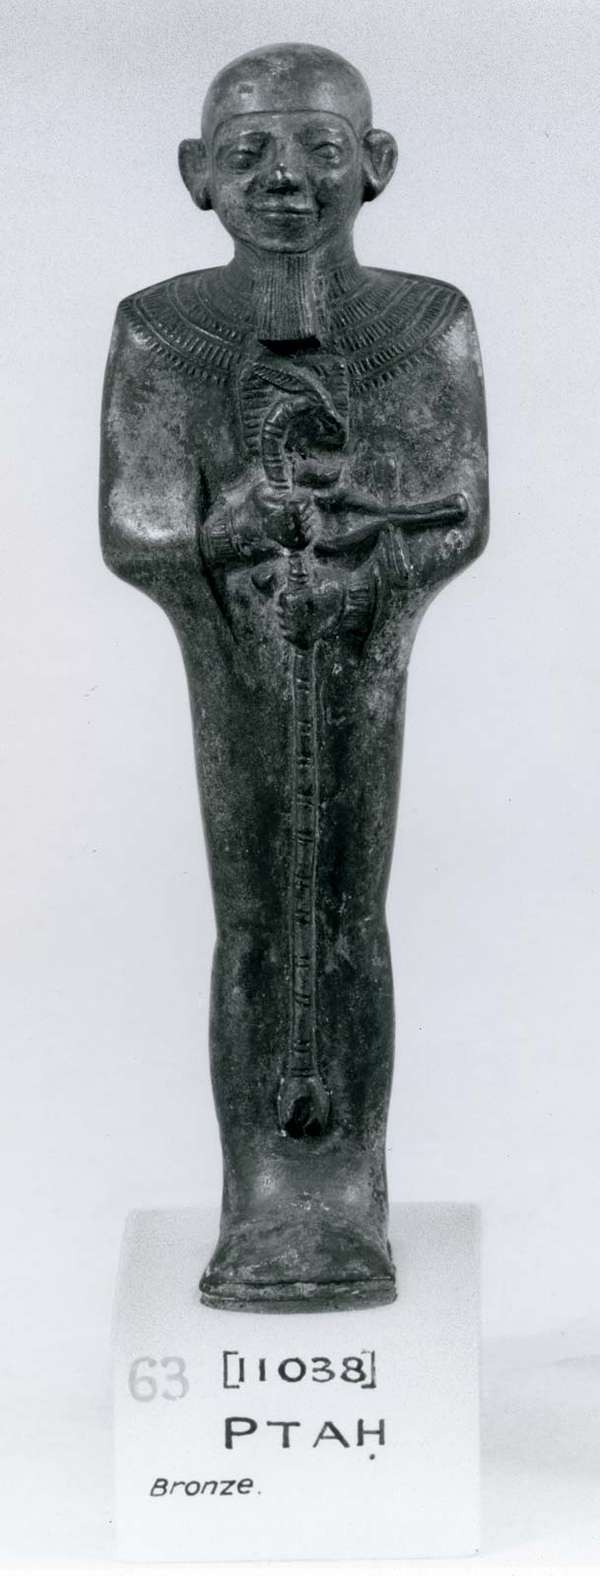 Ptah, holding the emblem of life and power, bronze statuette, Memphis, c. 600-100 BC; in the British Museum